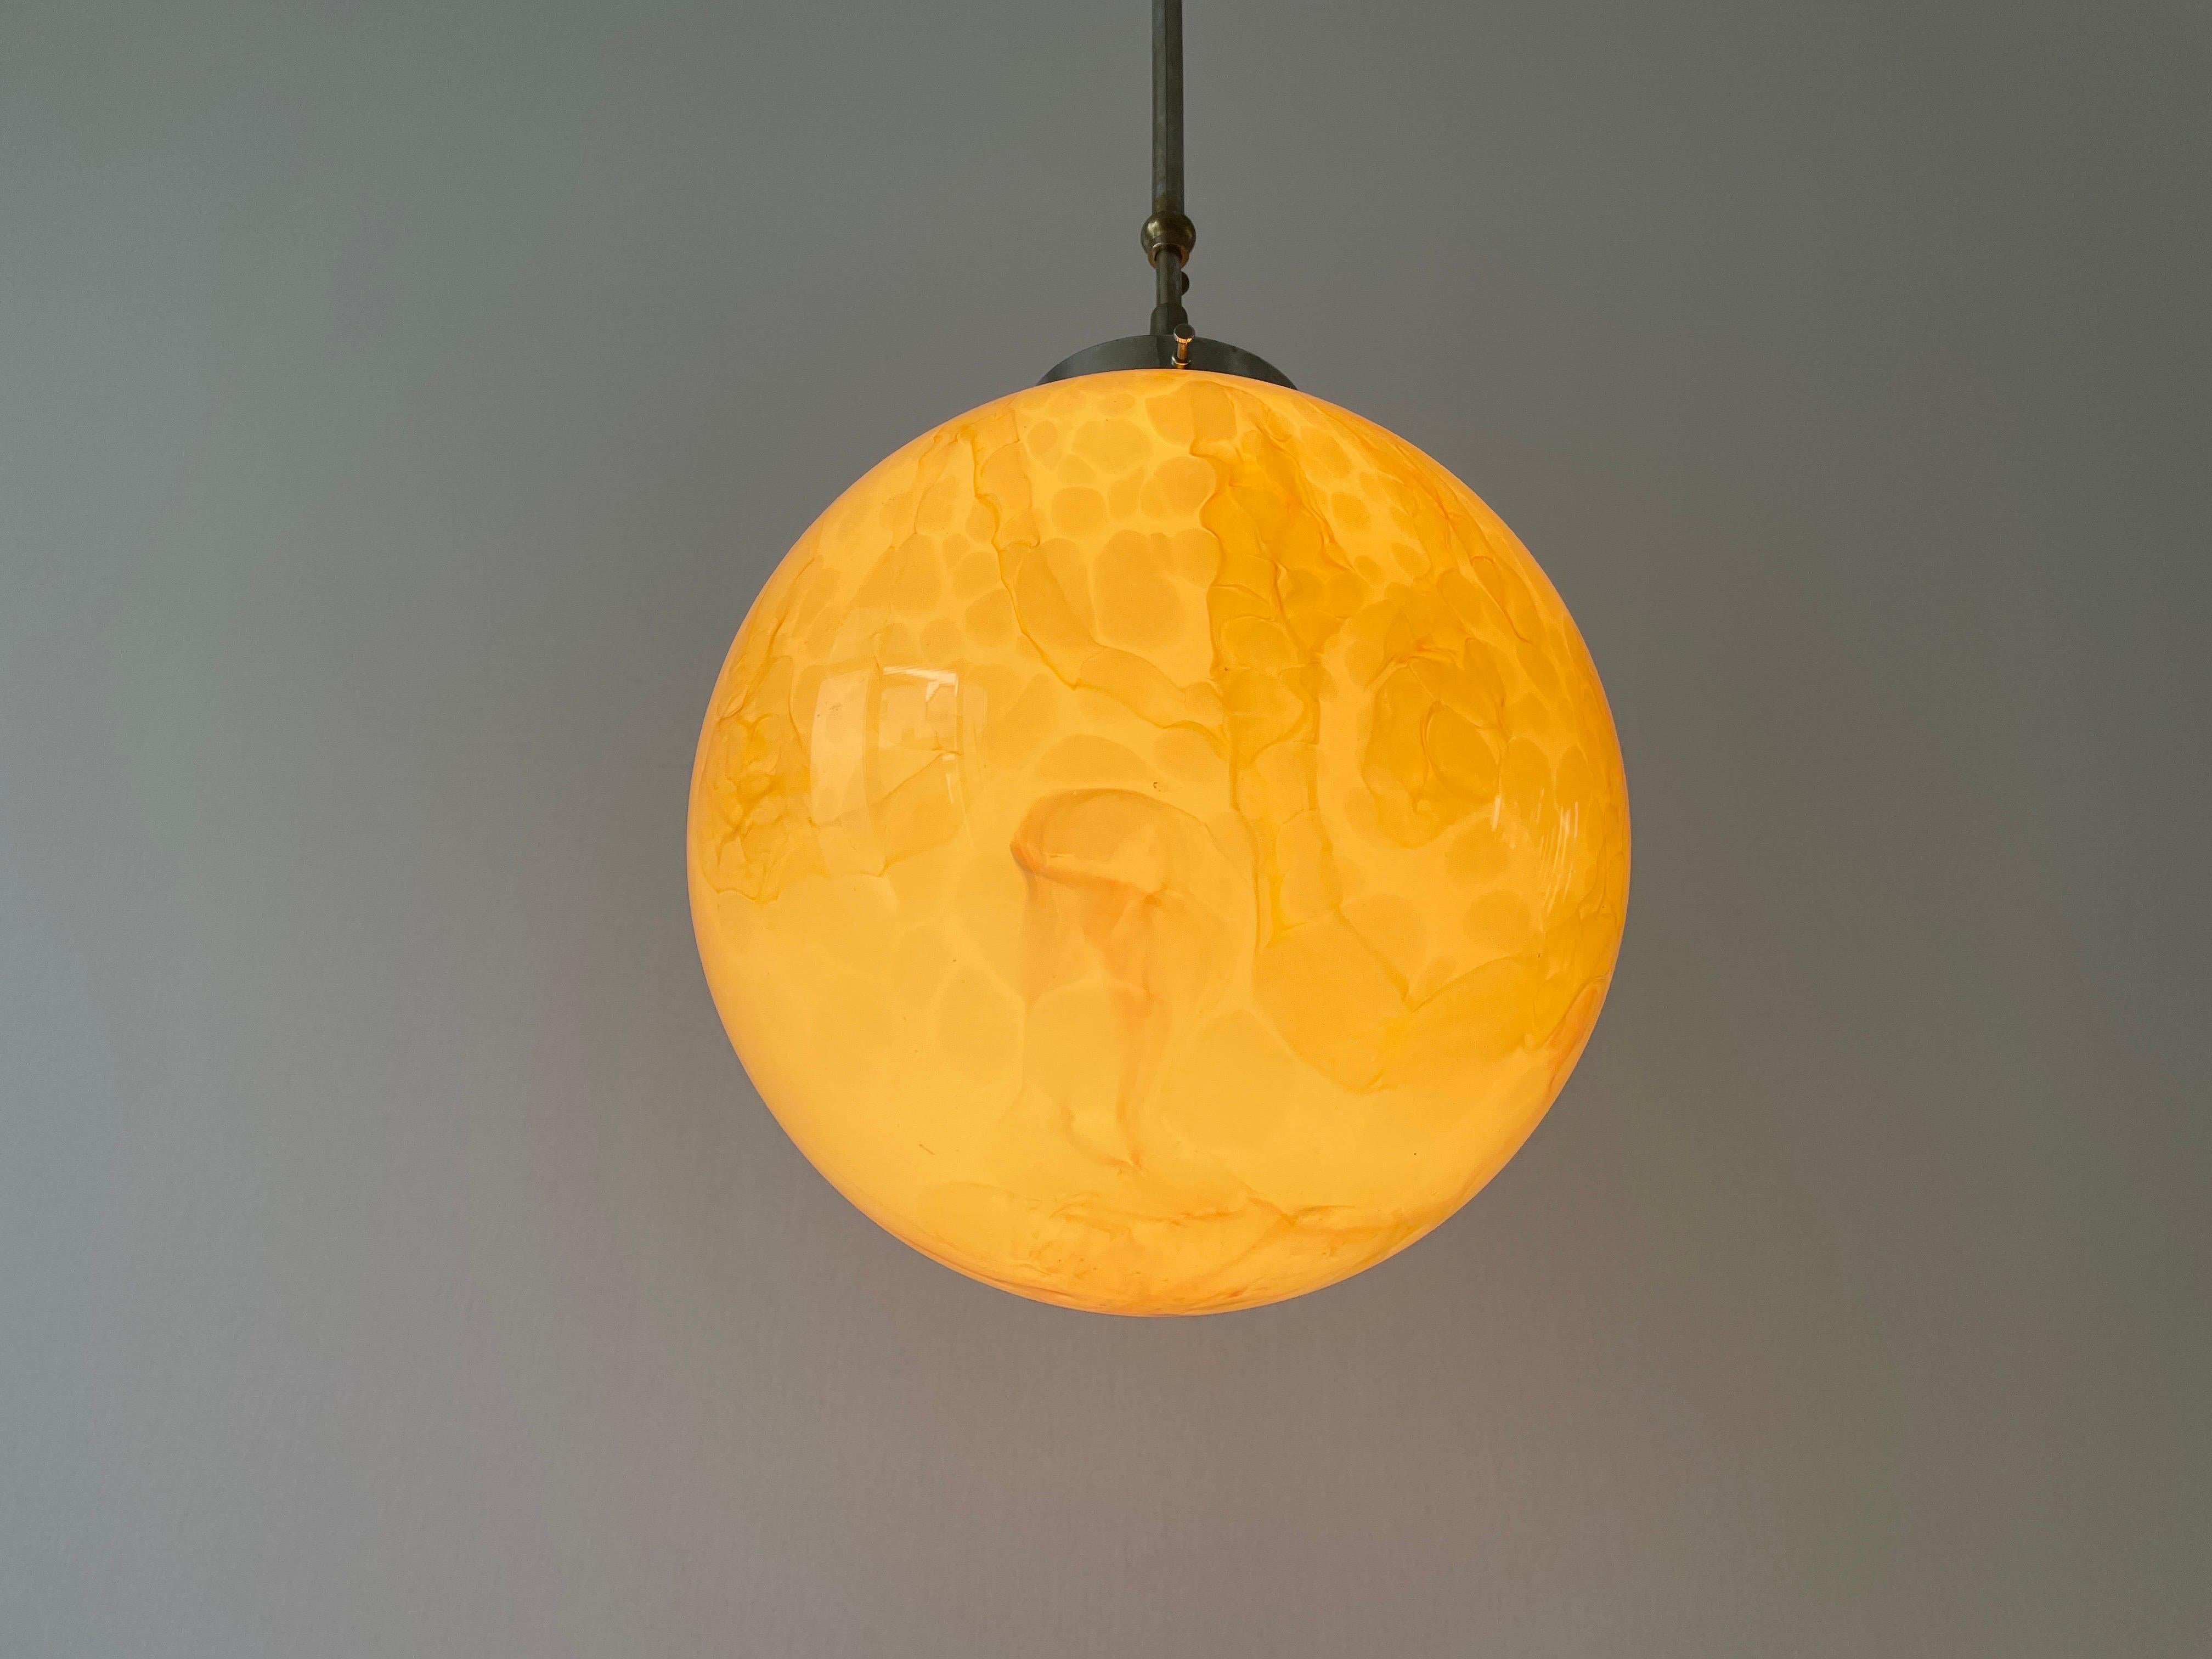 Art Deco Exceptional Church Lamp with Yellow Glass Ball , 1930s, Germany For Sale 6